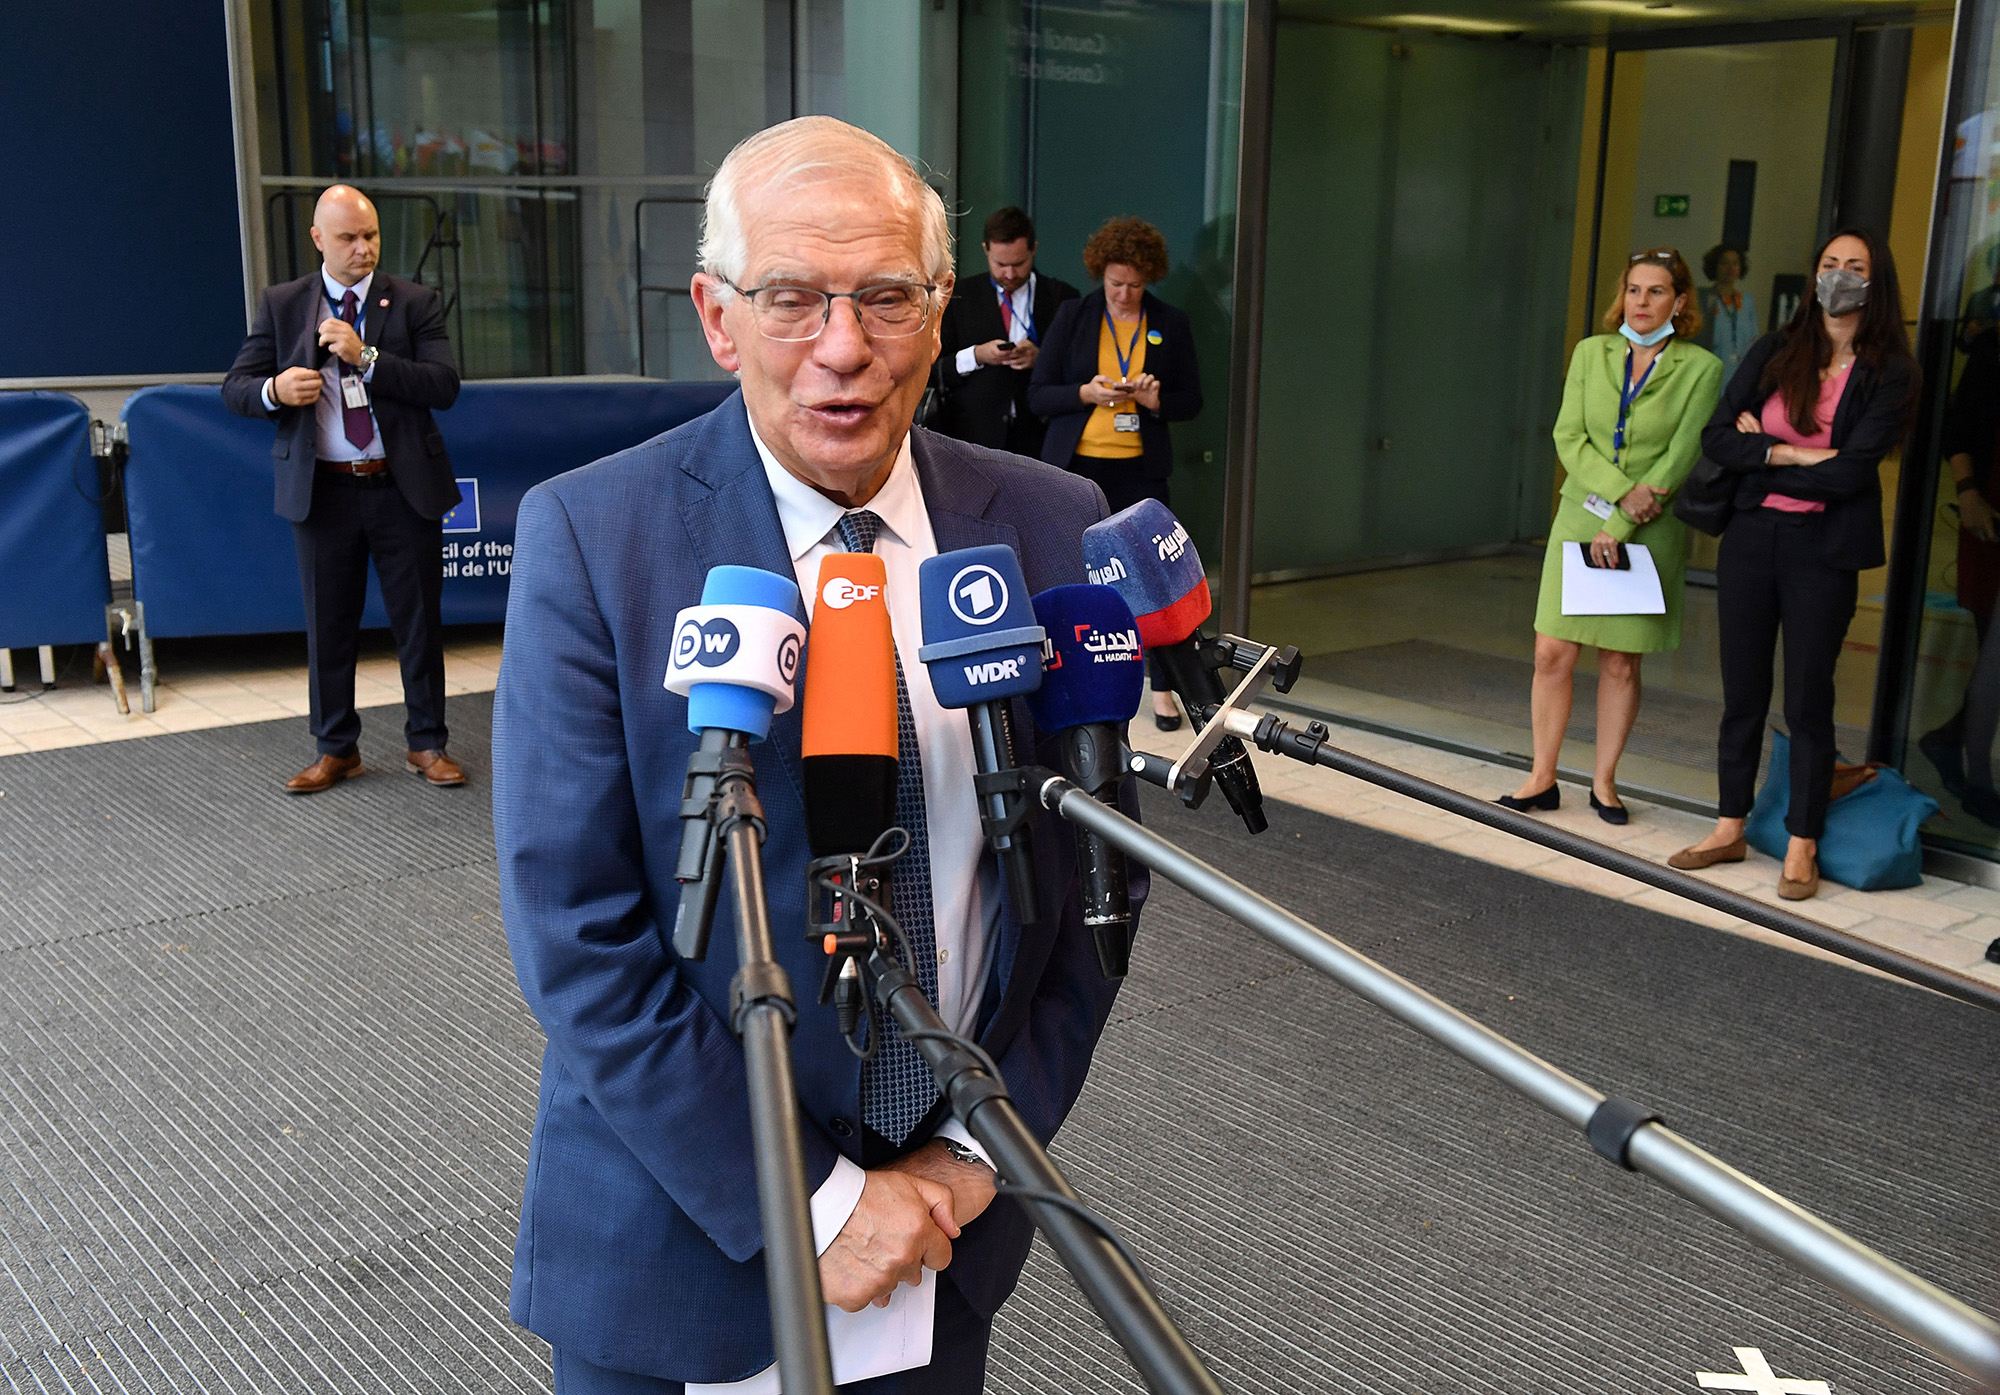 High Representative of the European Union for Foreign Affairs and Security Policy Josep Borrell talks to the press during a Foreign Affairs Council meeting at the EU Council building in Luxembourg on June 20.